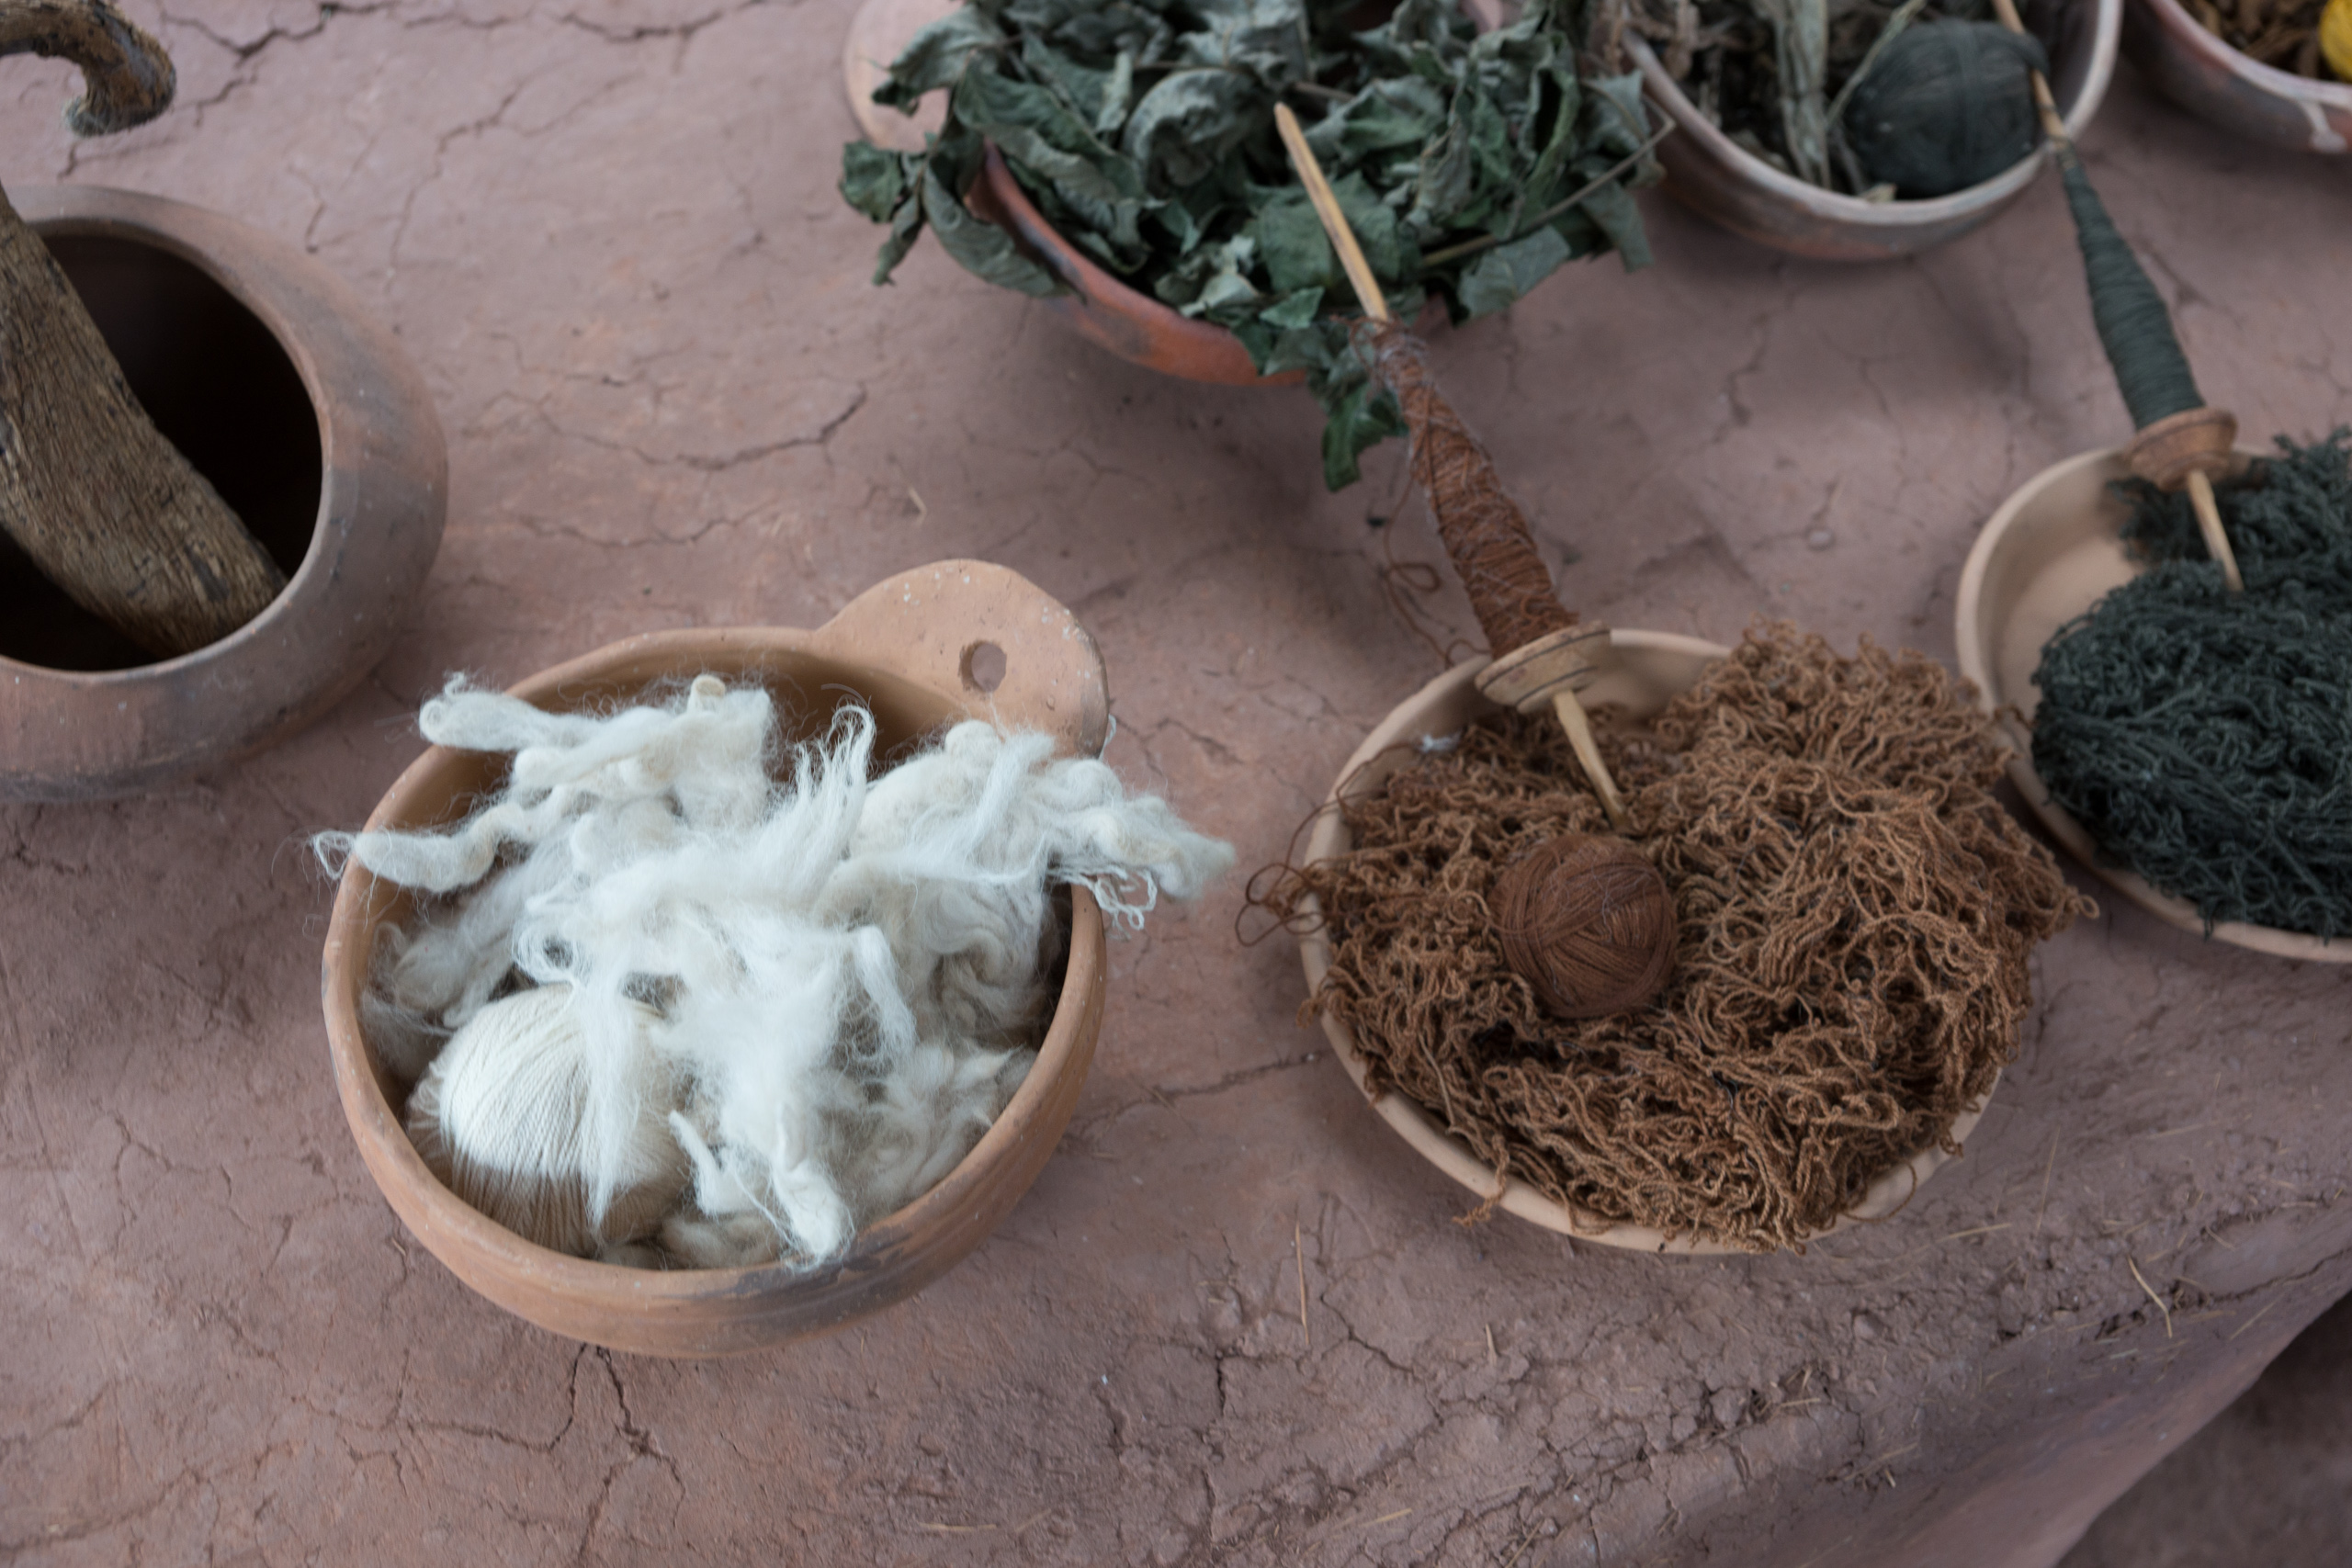 Natural wool and dye.